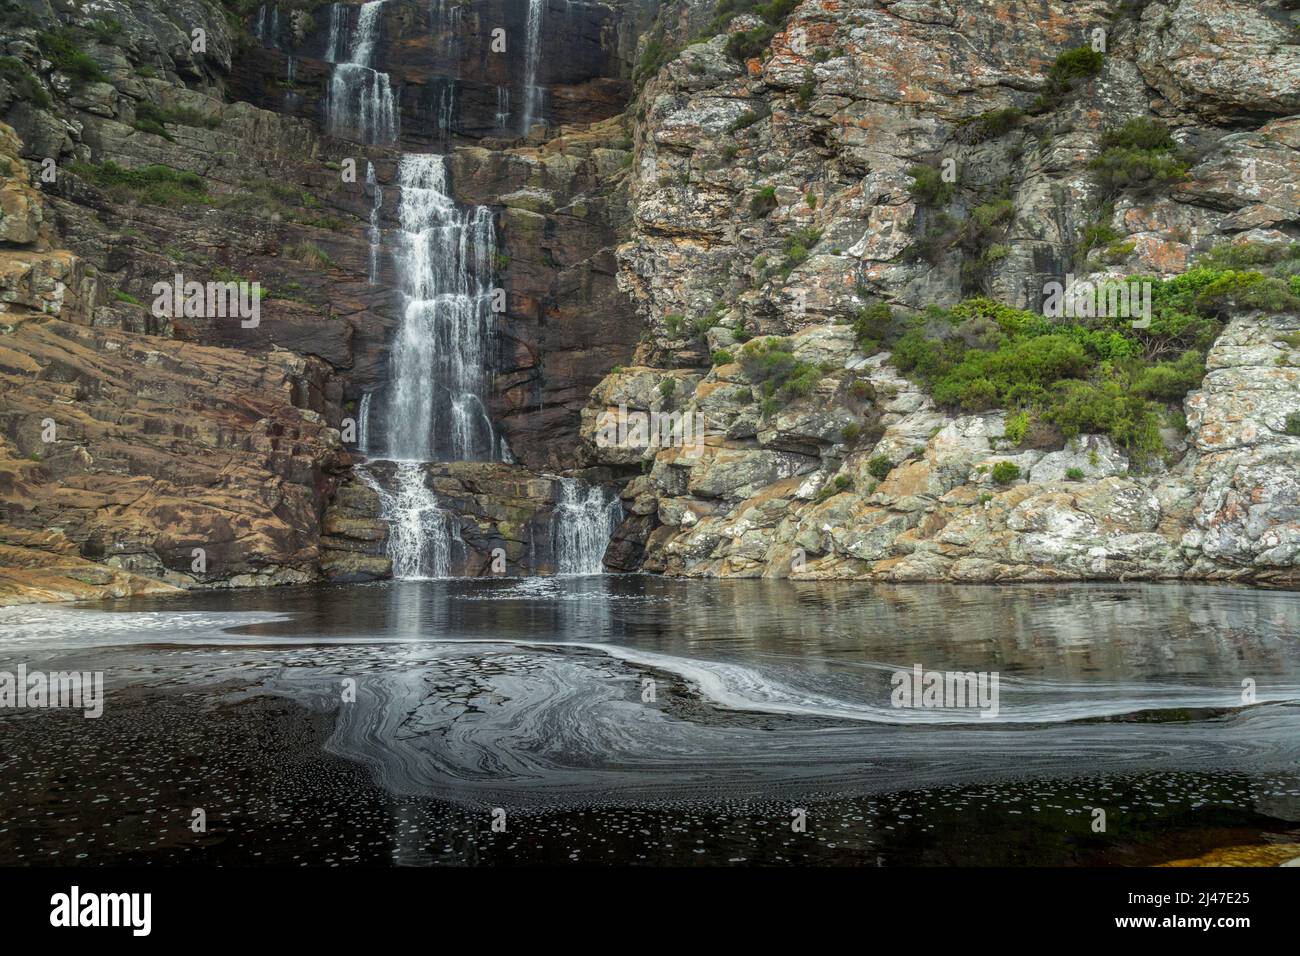 The Jerling River Waterfall, which is on first day ion The Otter Trail, in the Western Cape of South Africa. Stock Photo